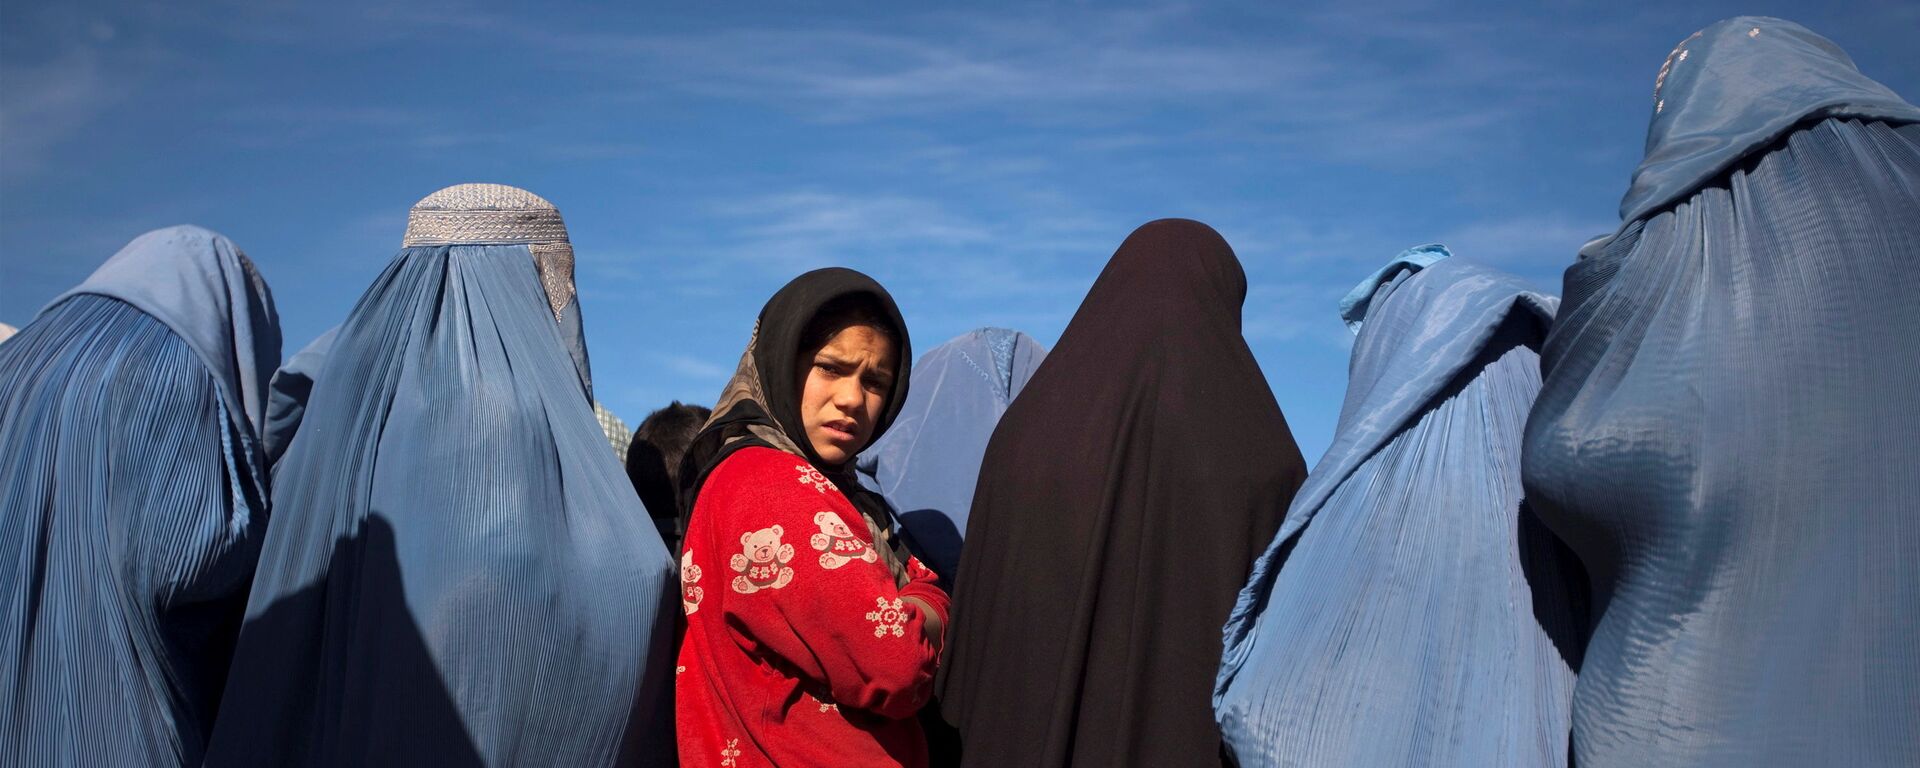 An Afghan girl stands among widows clad in burqas during a cash for work project by humanitarian organisation CARE International in Kabul - Sputnik International, 1920, 07.09.2021